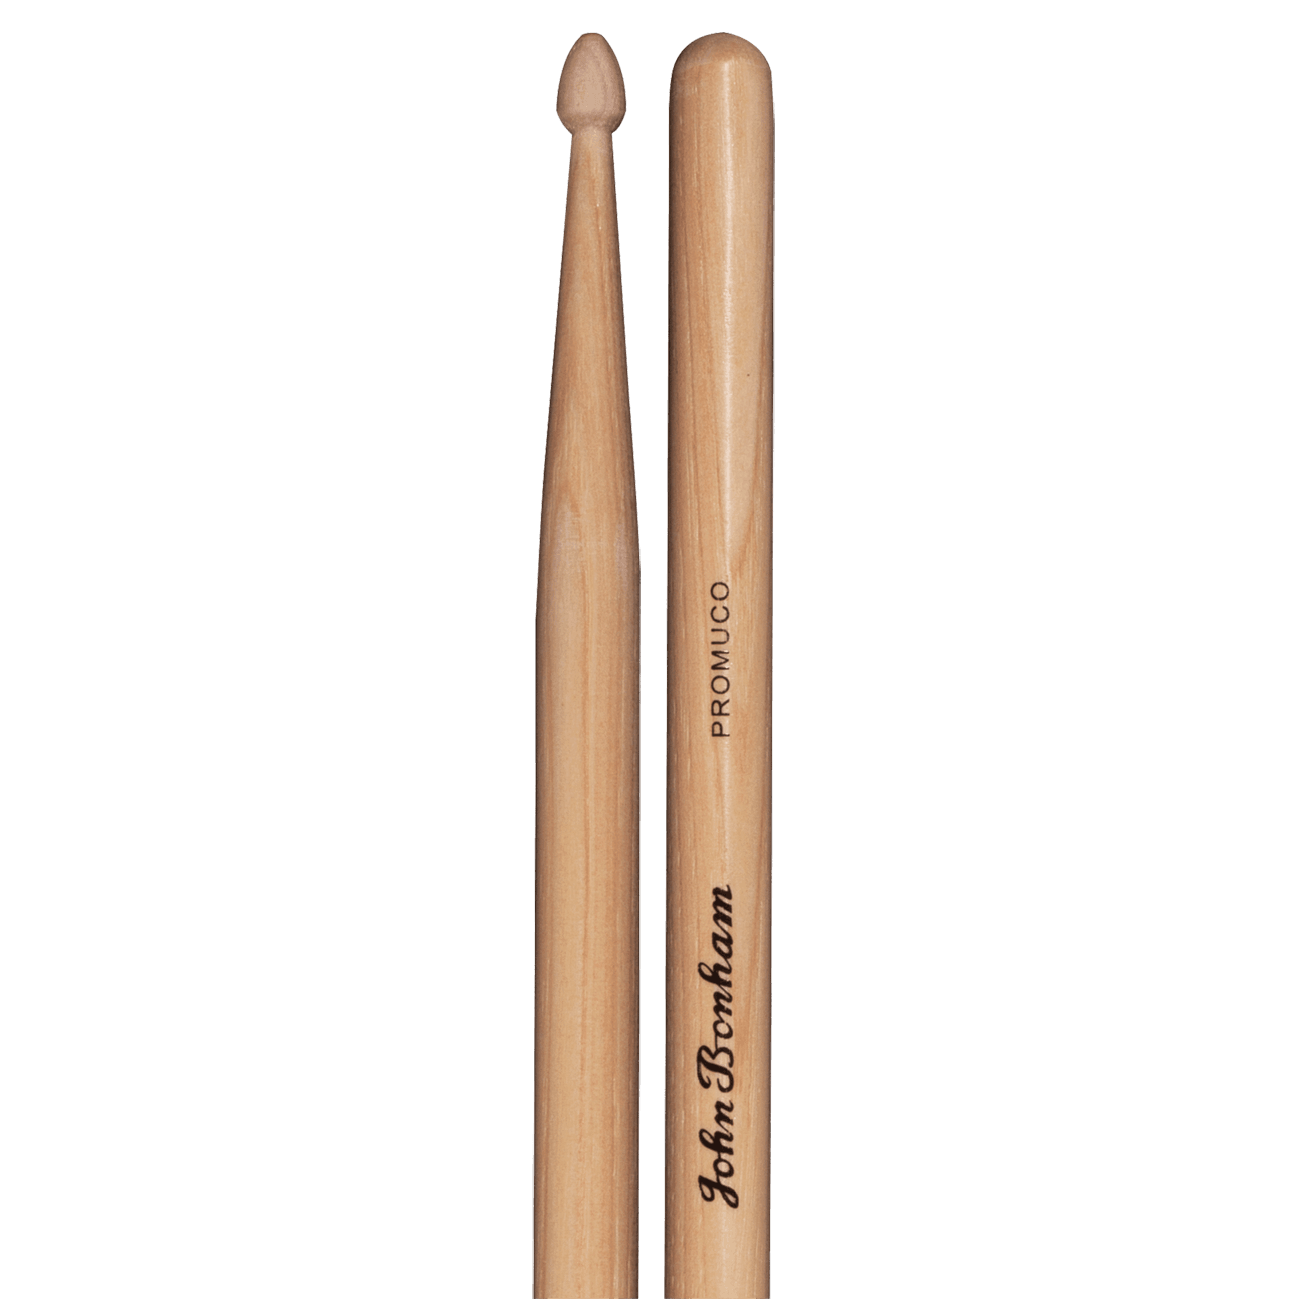 Promuco John Bonham Drumsticks - Drums & Percussion - Sticks & Mallets by Promuco at Muso's Stuff